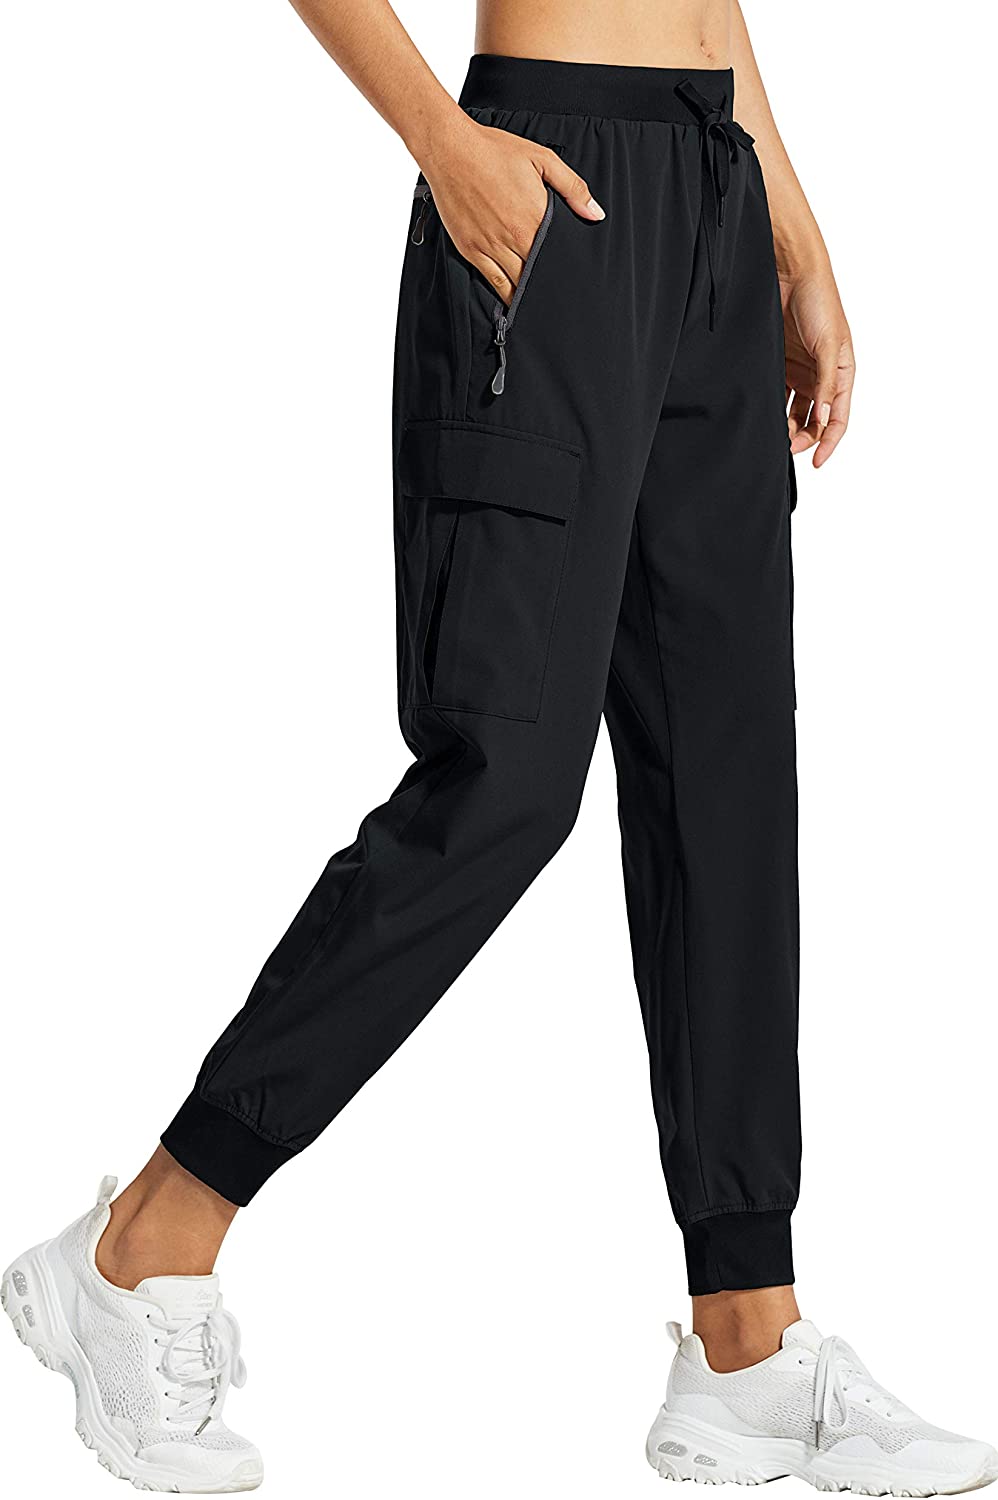  Libin Women's Joggers Pants Athletic Sweatpants with Pockets  Running Tapered Casual Pants for Workout,Lounge, Black S : Clothing, Shoes  & Jewelry